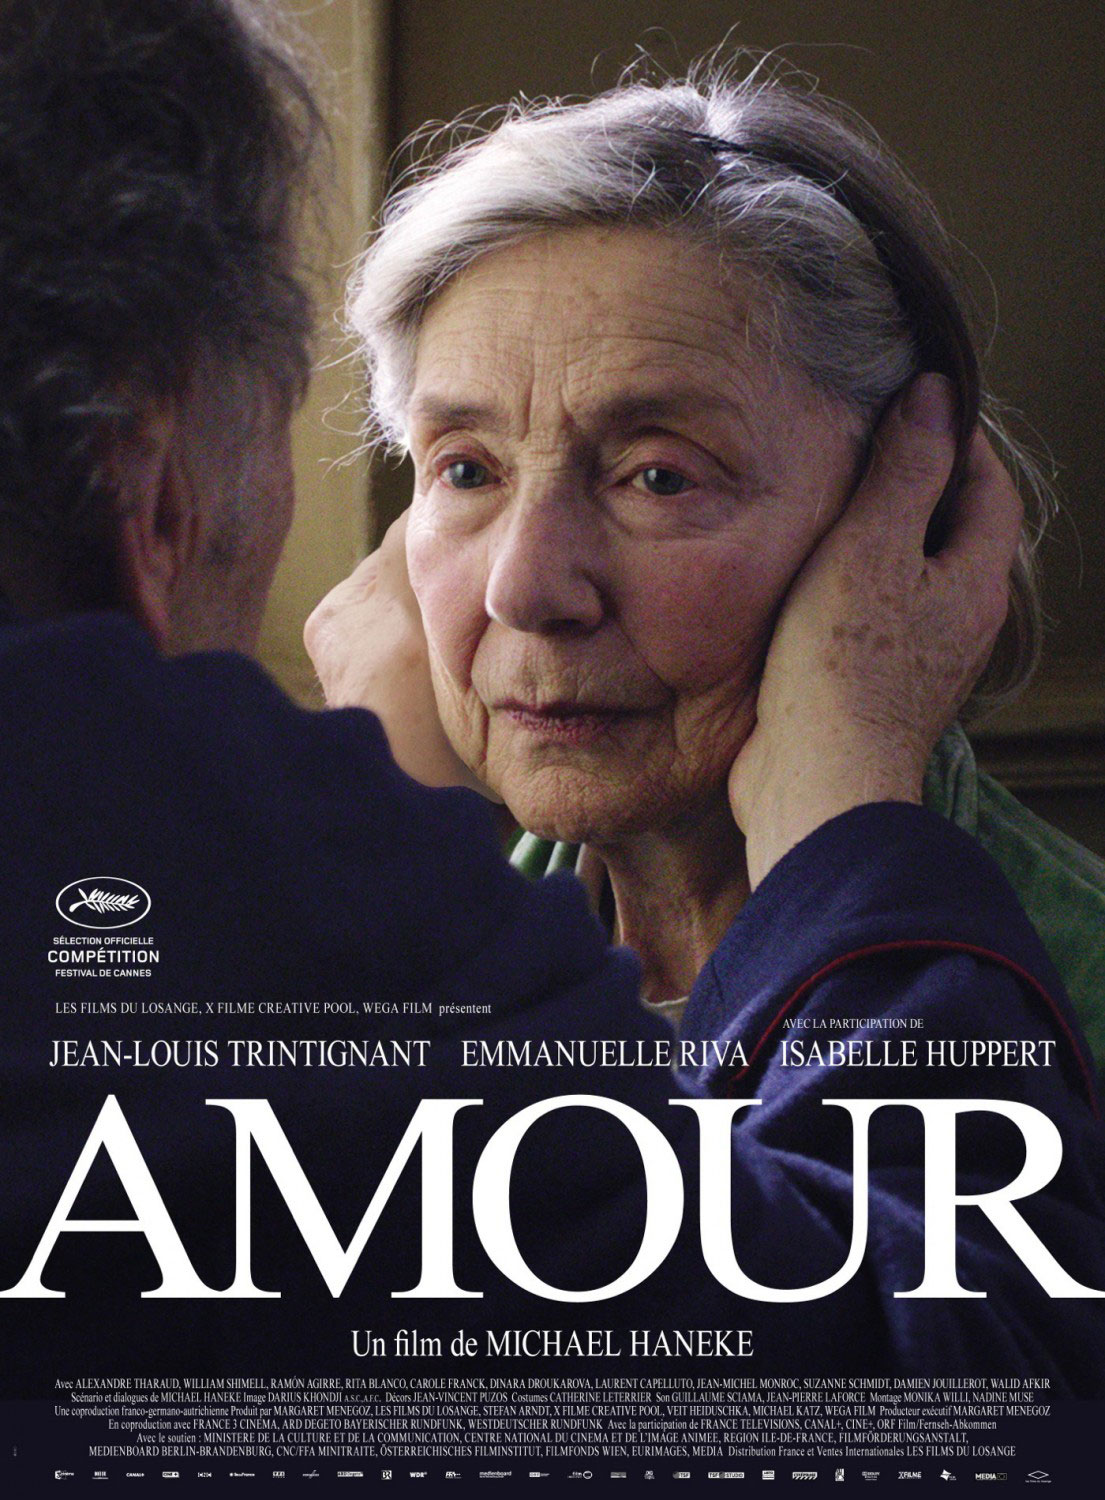 amour movie review nytimes